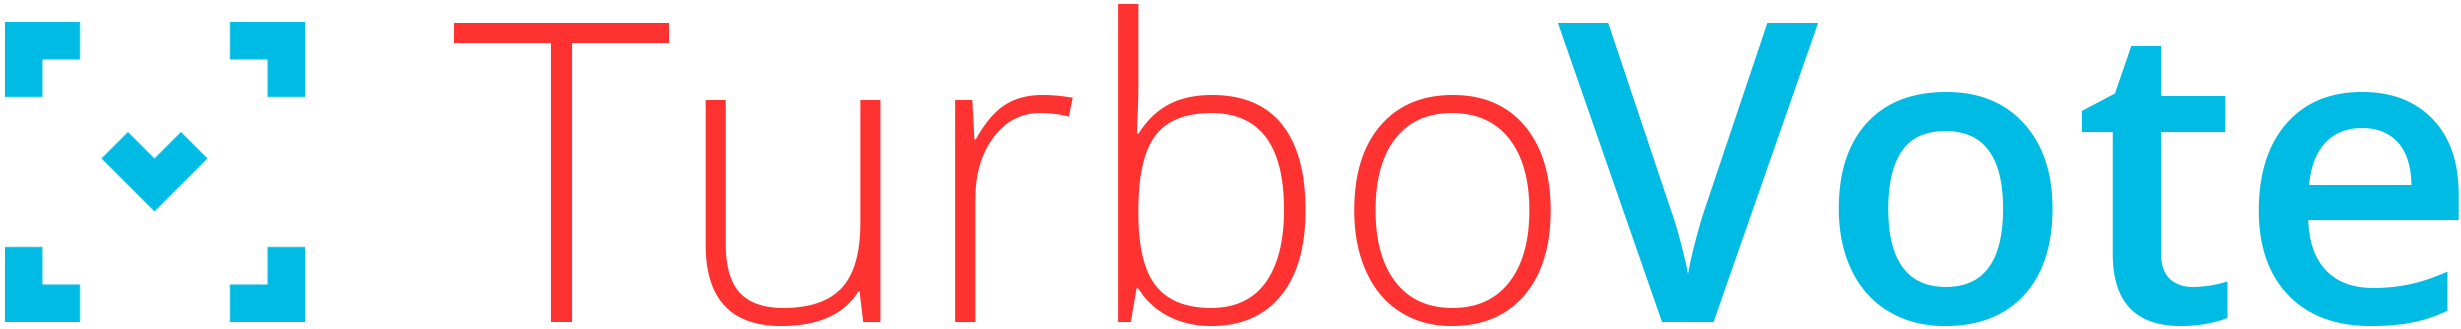 TurboVote_Logo.png